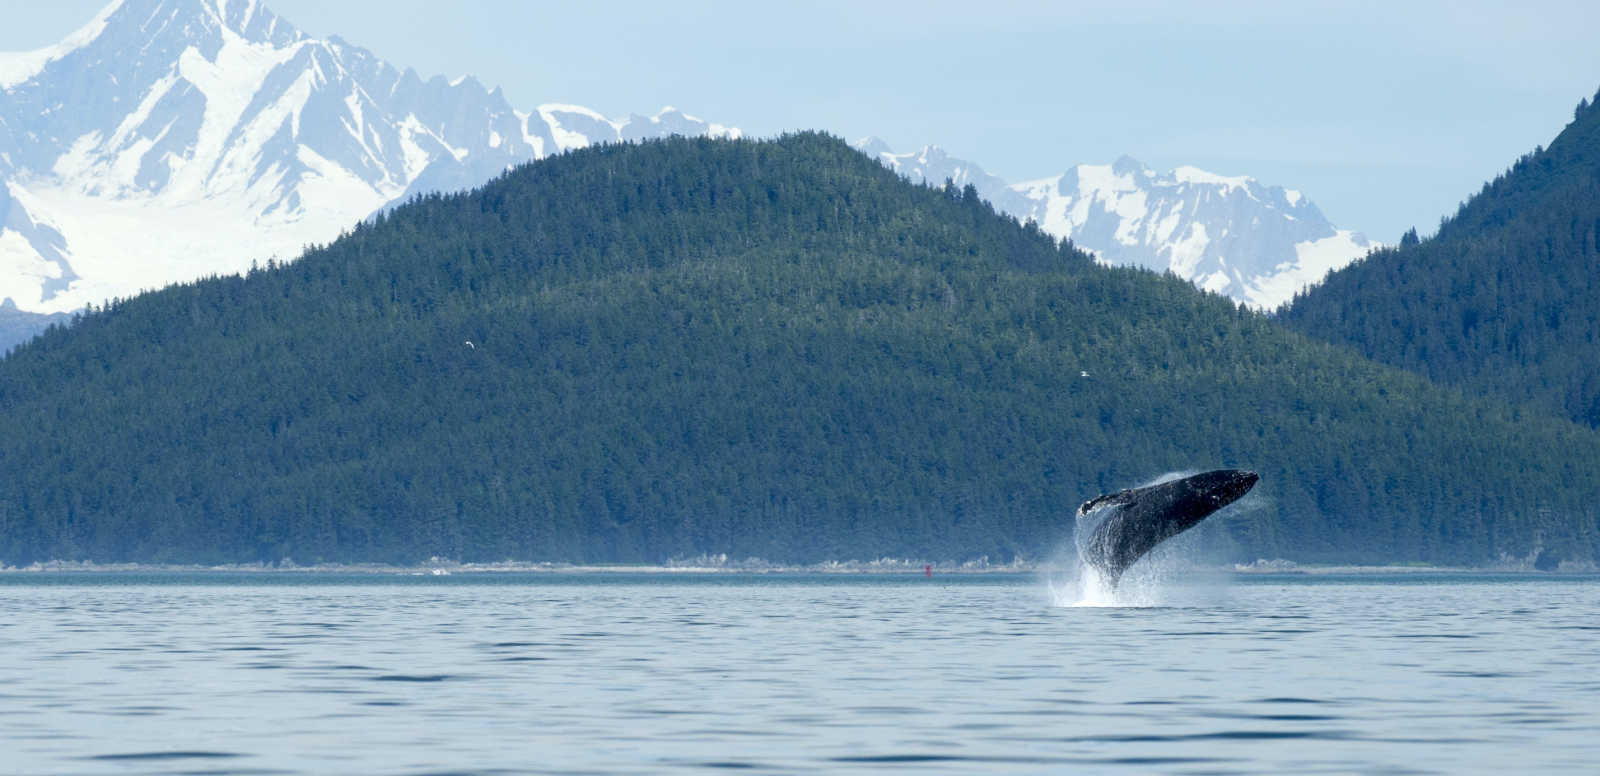 A whale curves out of the water in the Alaskan wilderness.